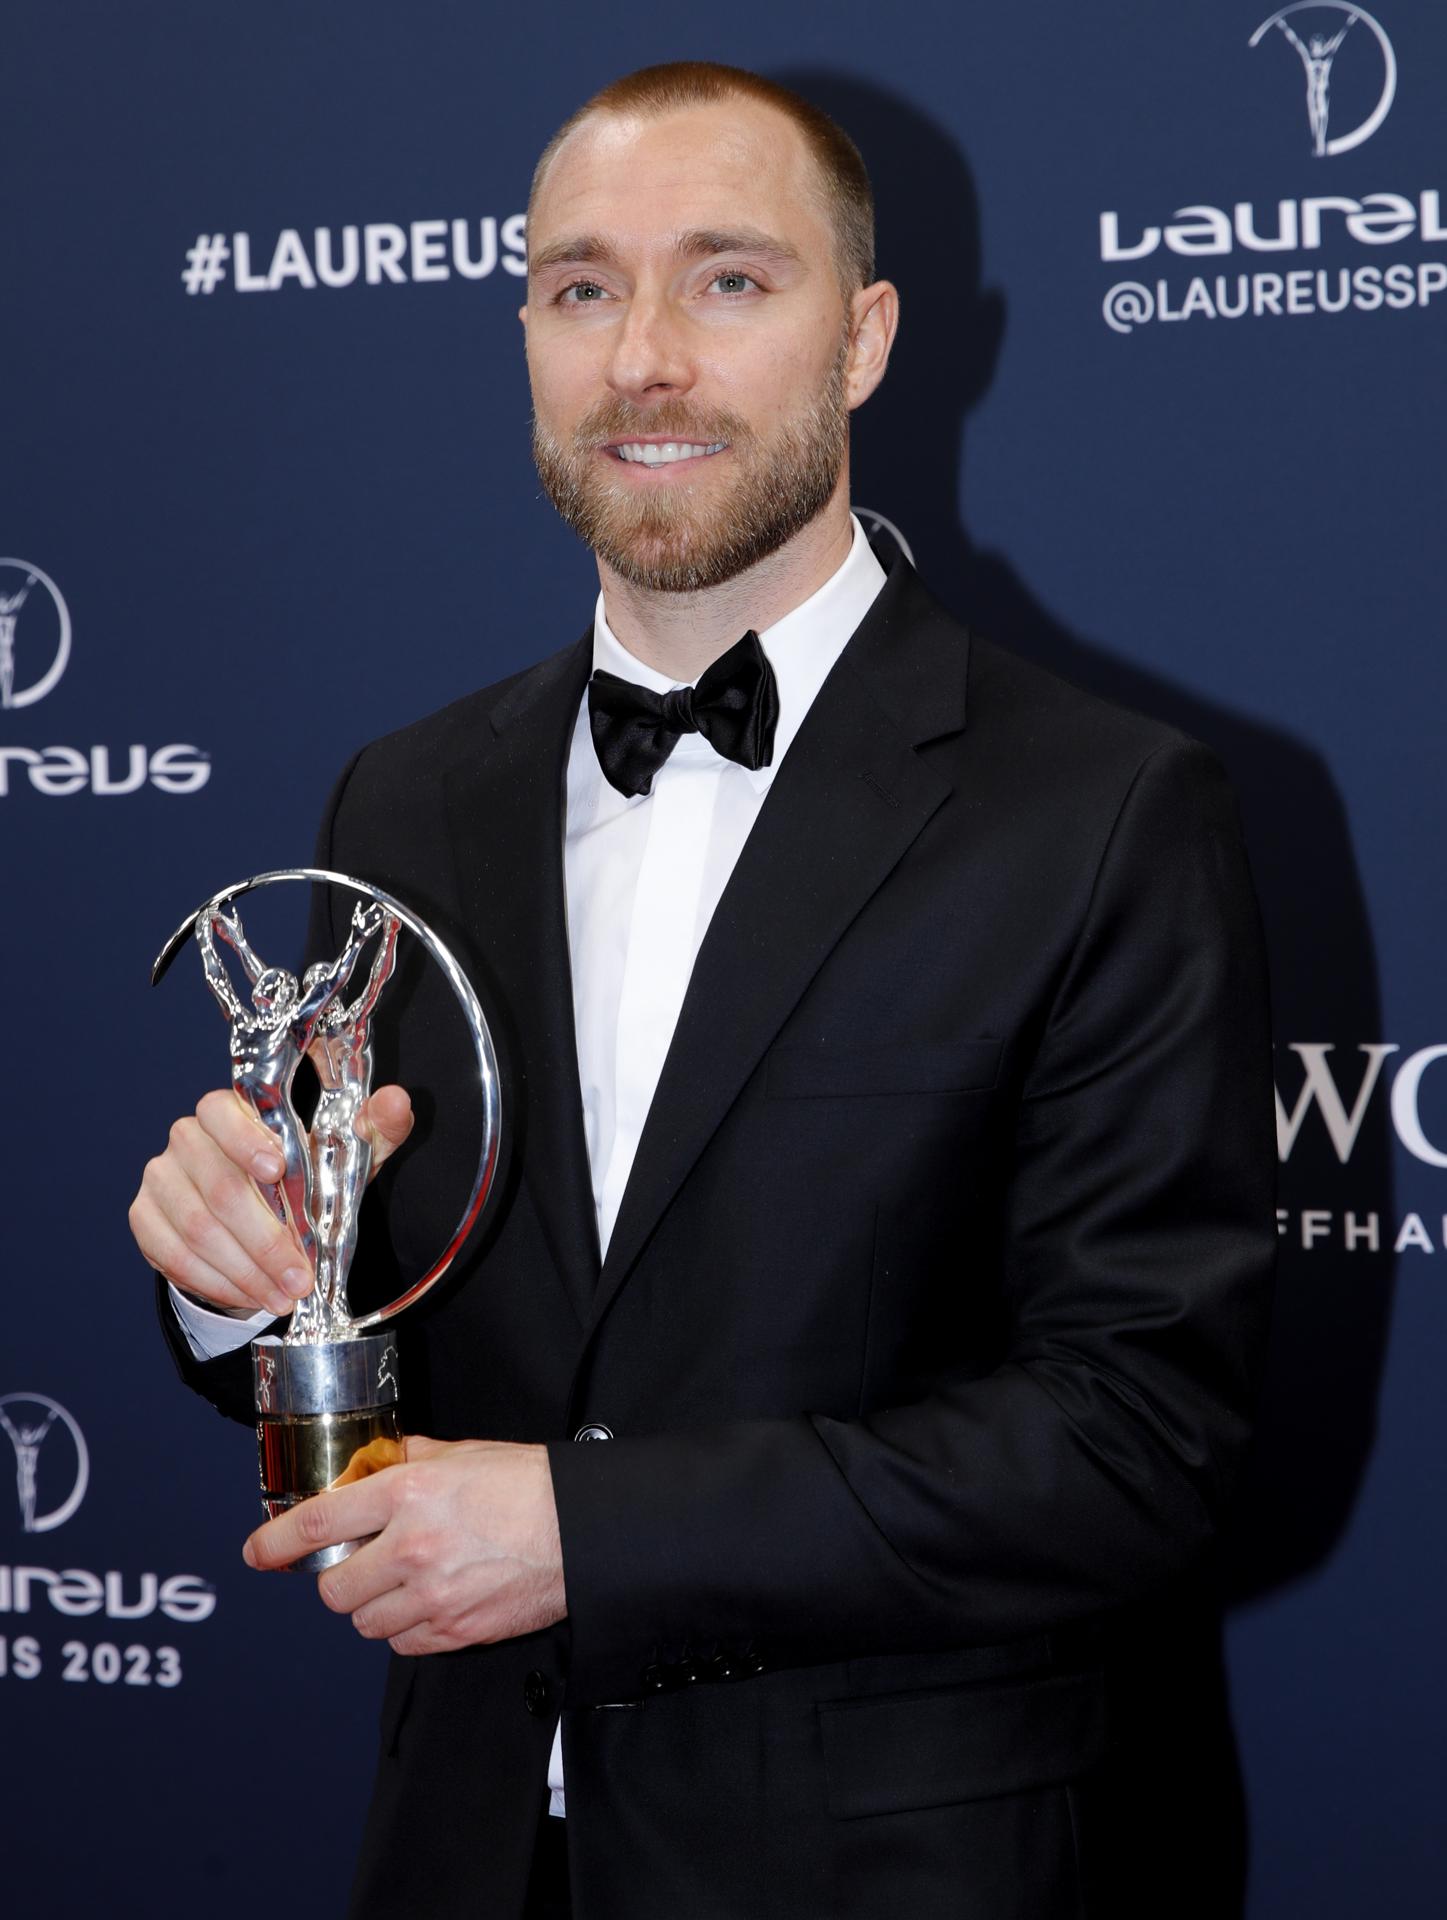 Manchester United midfielder Christian Eriksen holds up the trophy he received on 8 May 2023 in Paris, France, at the Laureus World Sports Awards ceremony. The 31-year-old Dane, who suffered cardiac arrest on the field in June 2021, was honored in the Comeback of the Year category. EFE/EPA/TERESA SUAREZ
